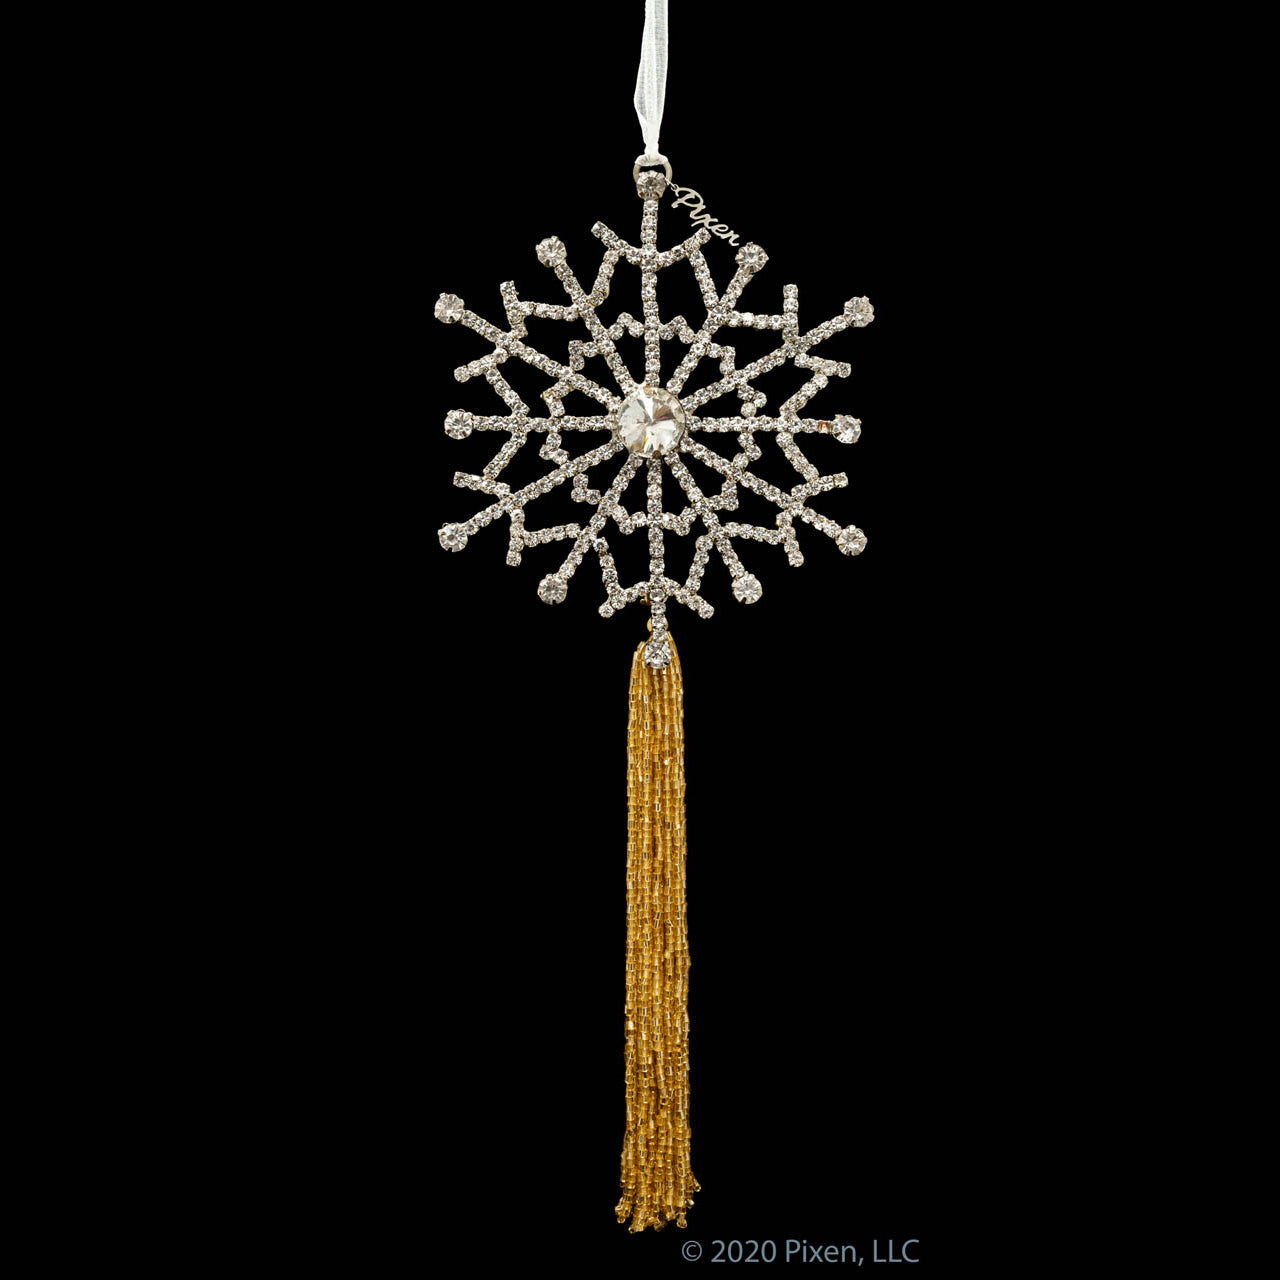 Gleam Snowflake Christmas Ornament by Pixen